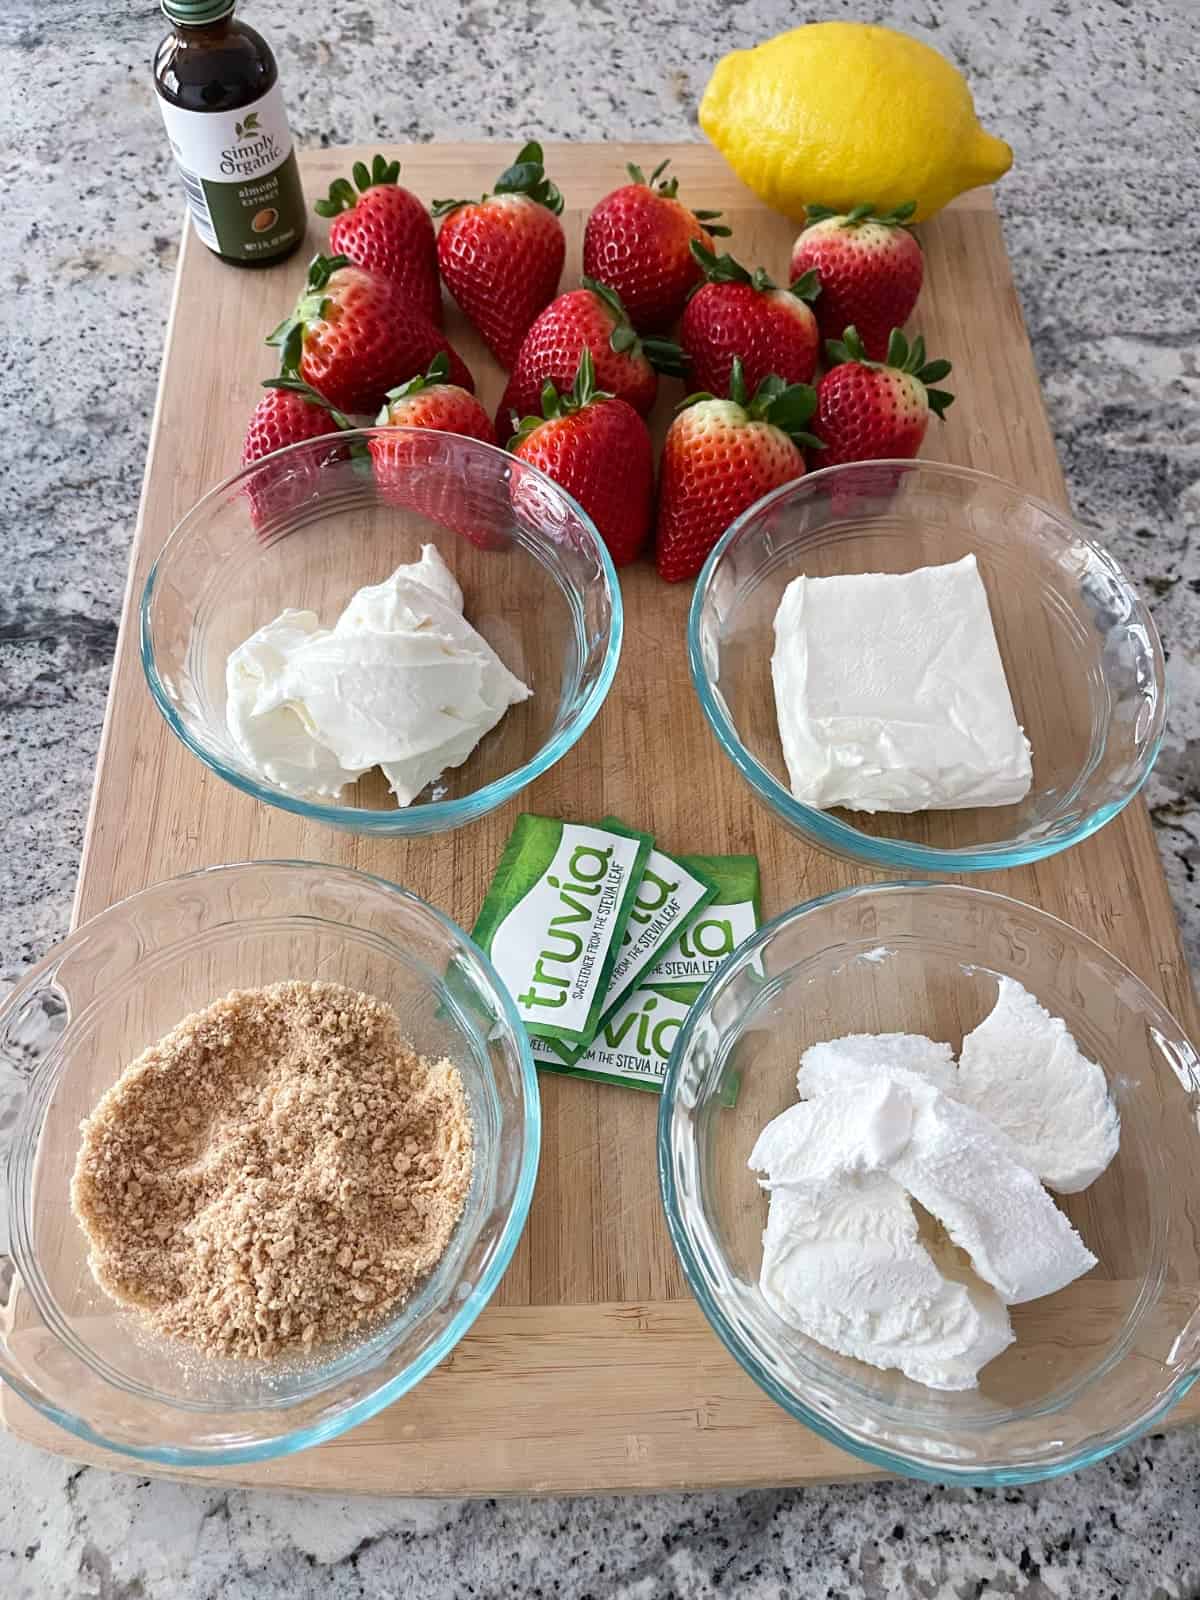 Fresh strawberries, almond extract, whole lemon, Truvia sweetener packets, graham cracker crumbs, light cream cheese and light whipped topping on wood cutting board.